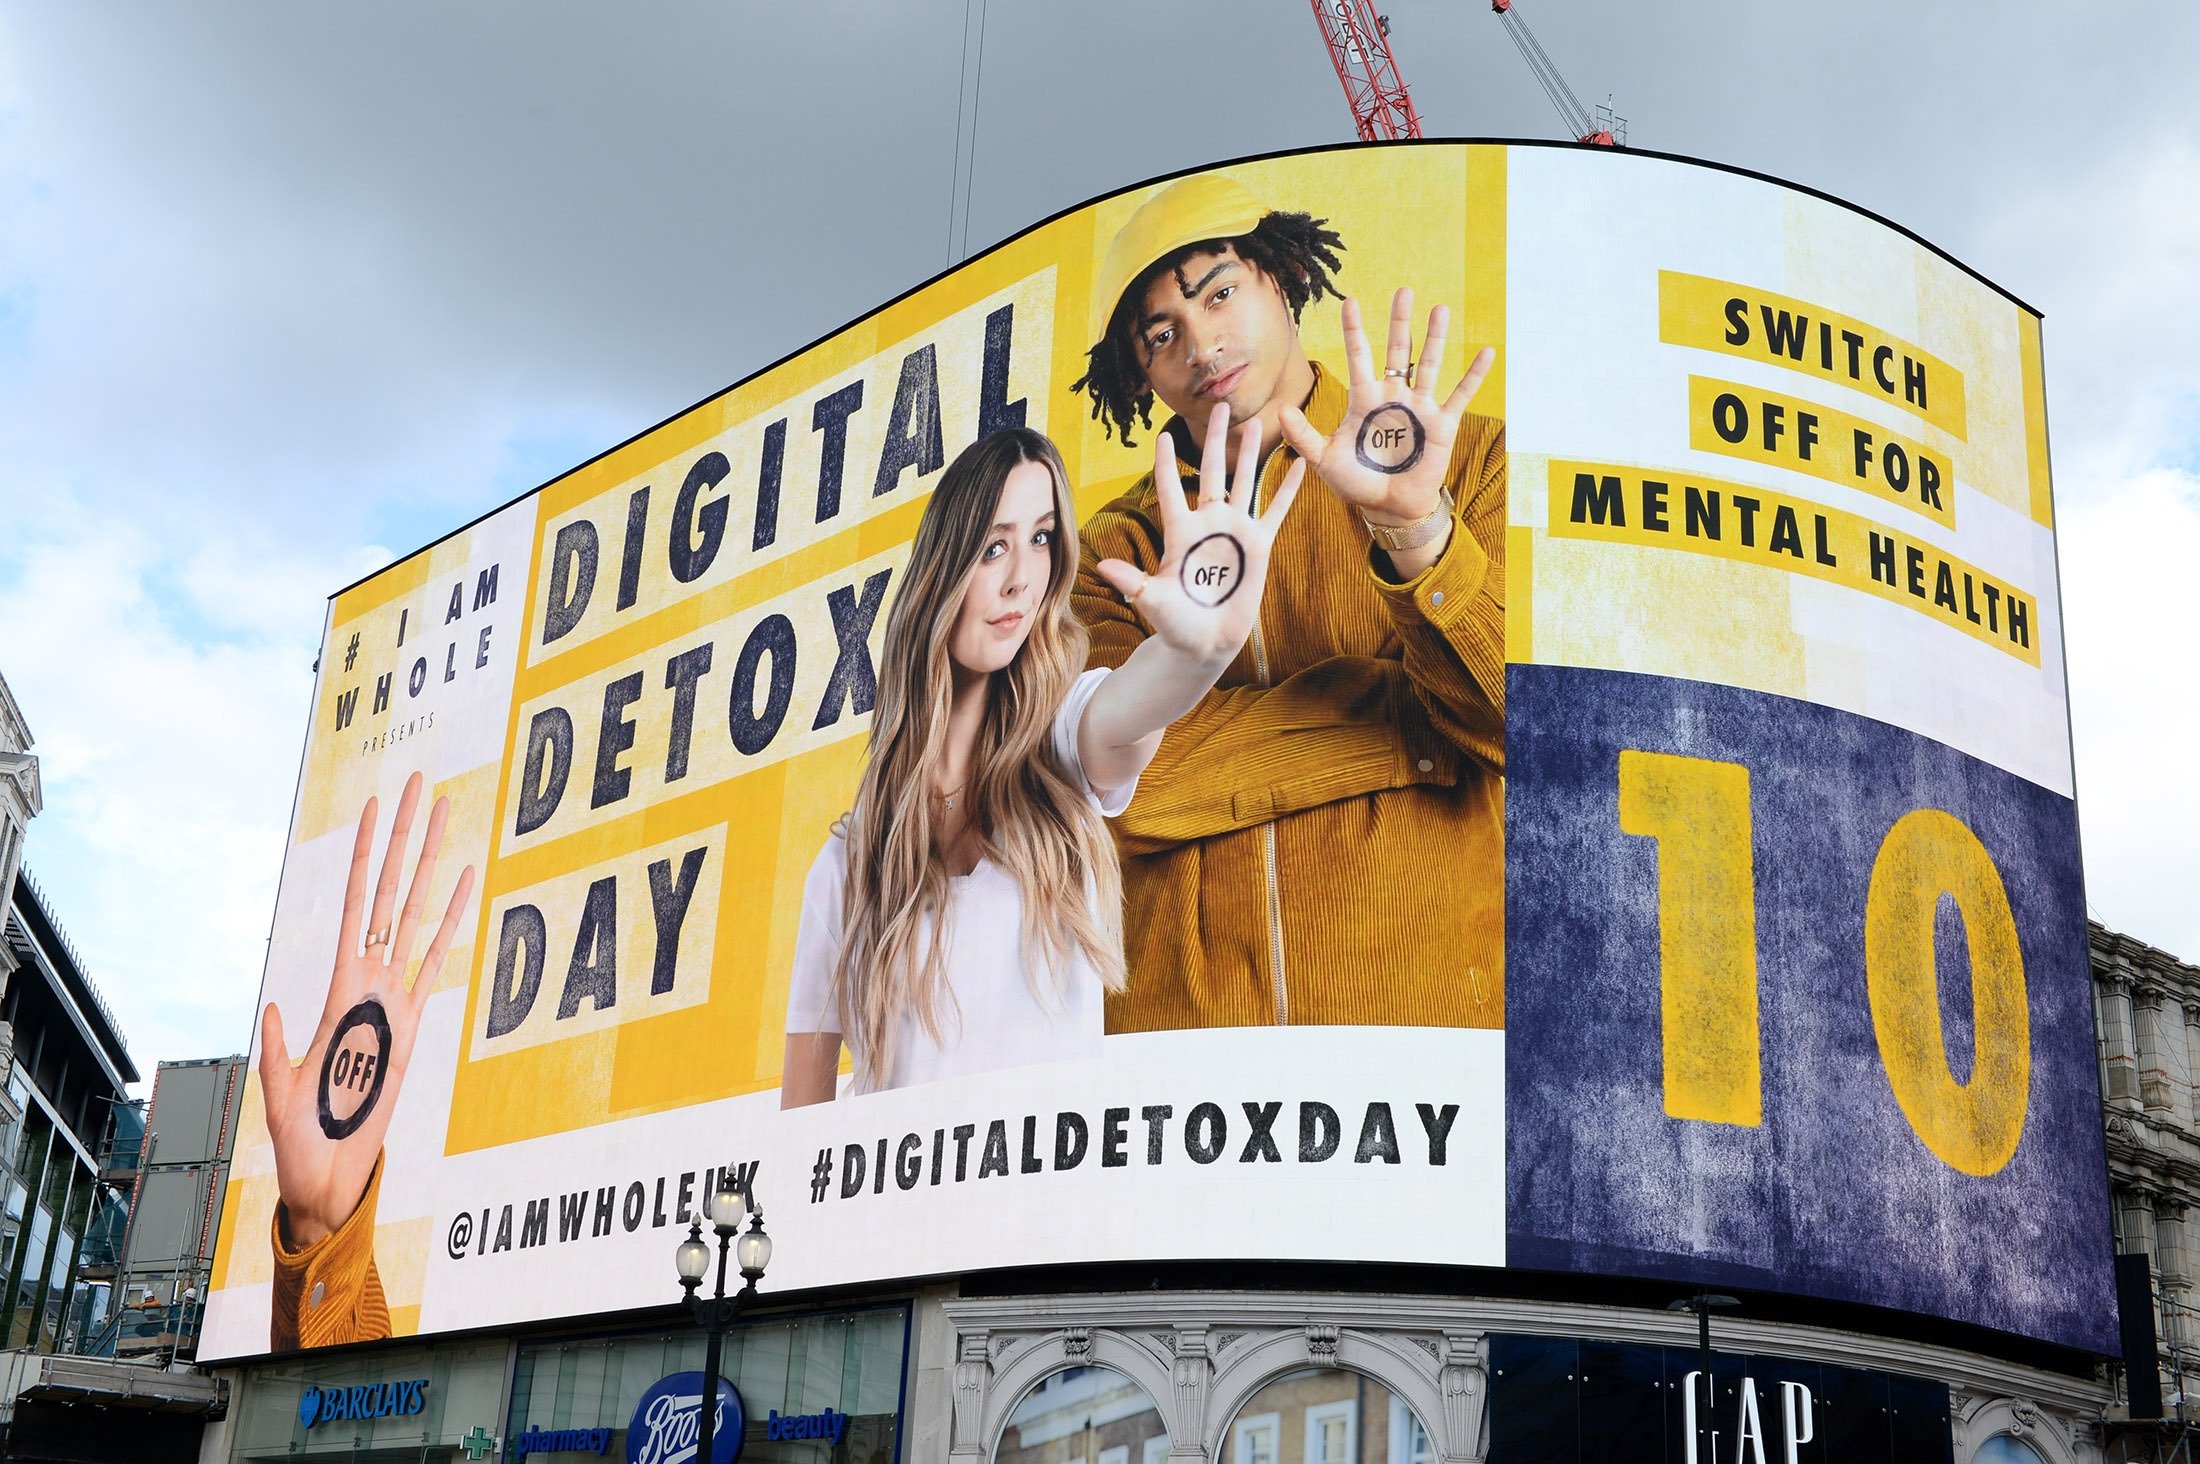 An advertisement promoting “Digital Detox Day,” encouraging people to step away from social media for the day, can be seen on the Piccadilly screen at Piccadilly Circus, London, U.K., Sept. 5, 2020. (Getty Images)